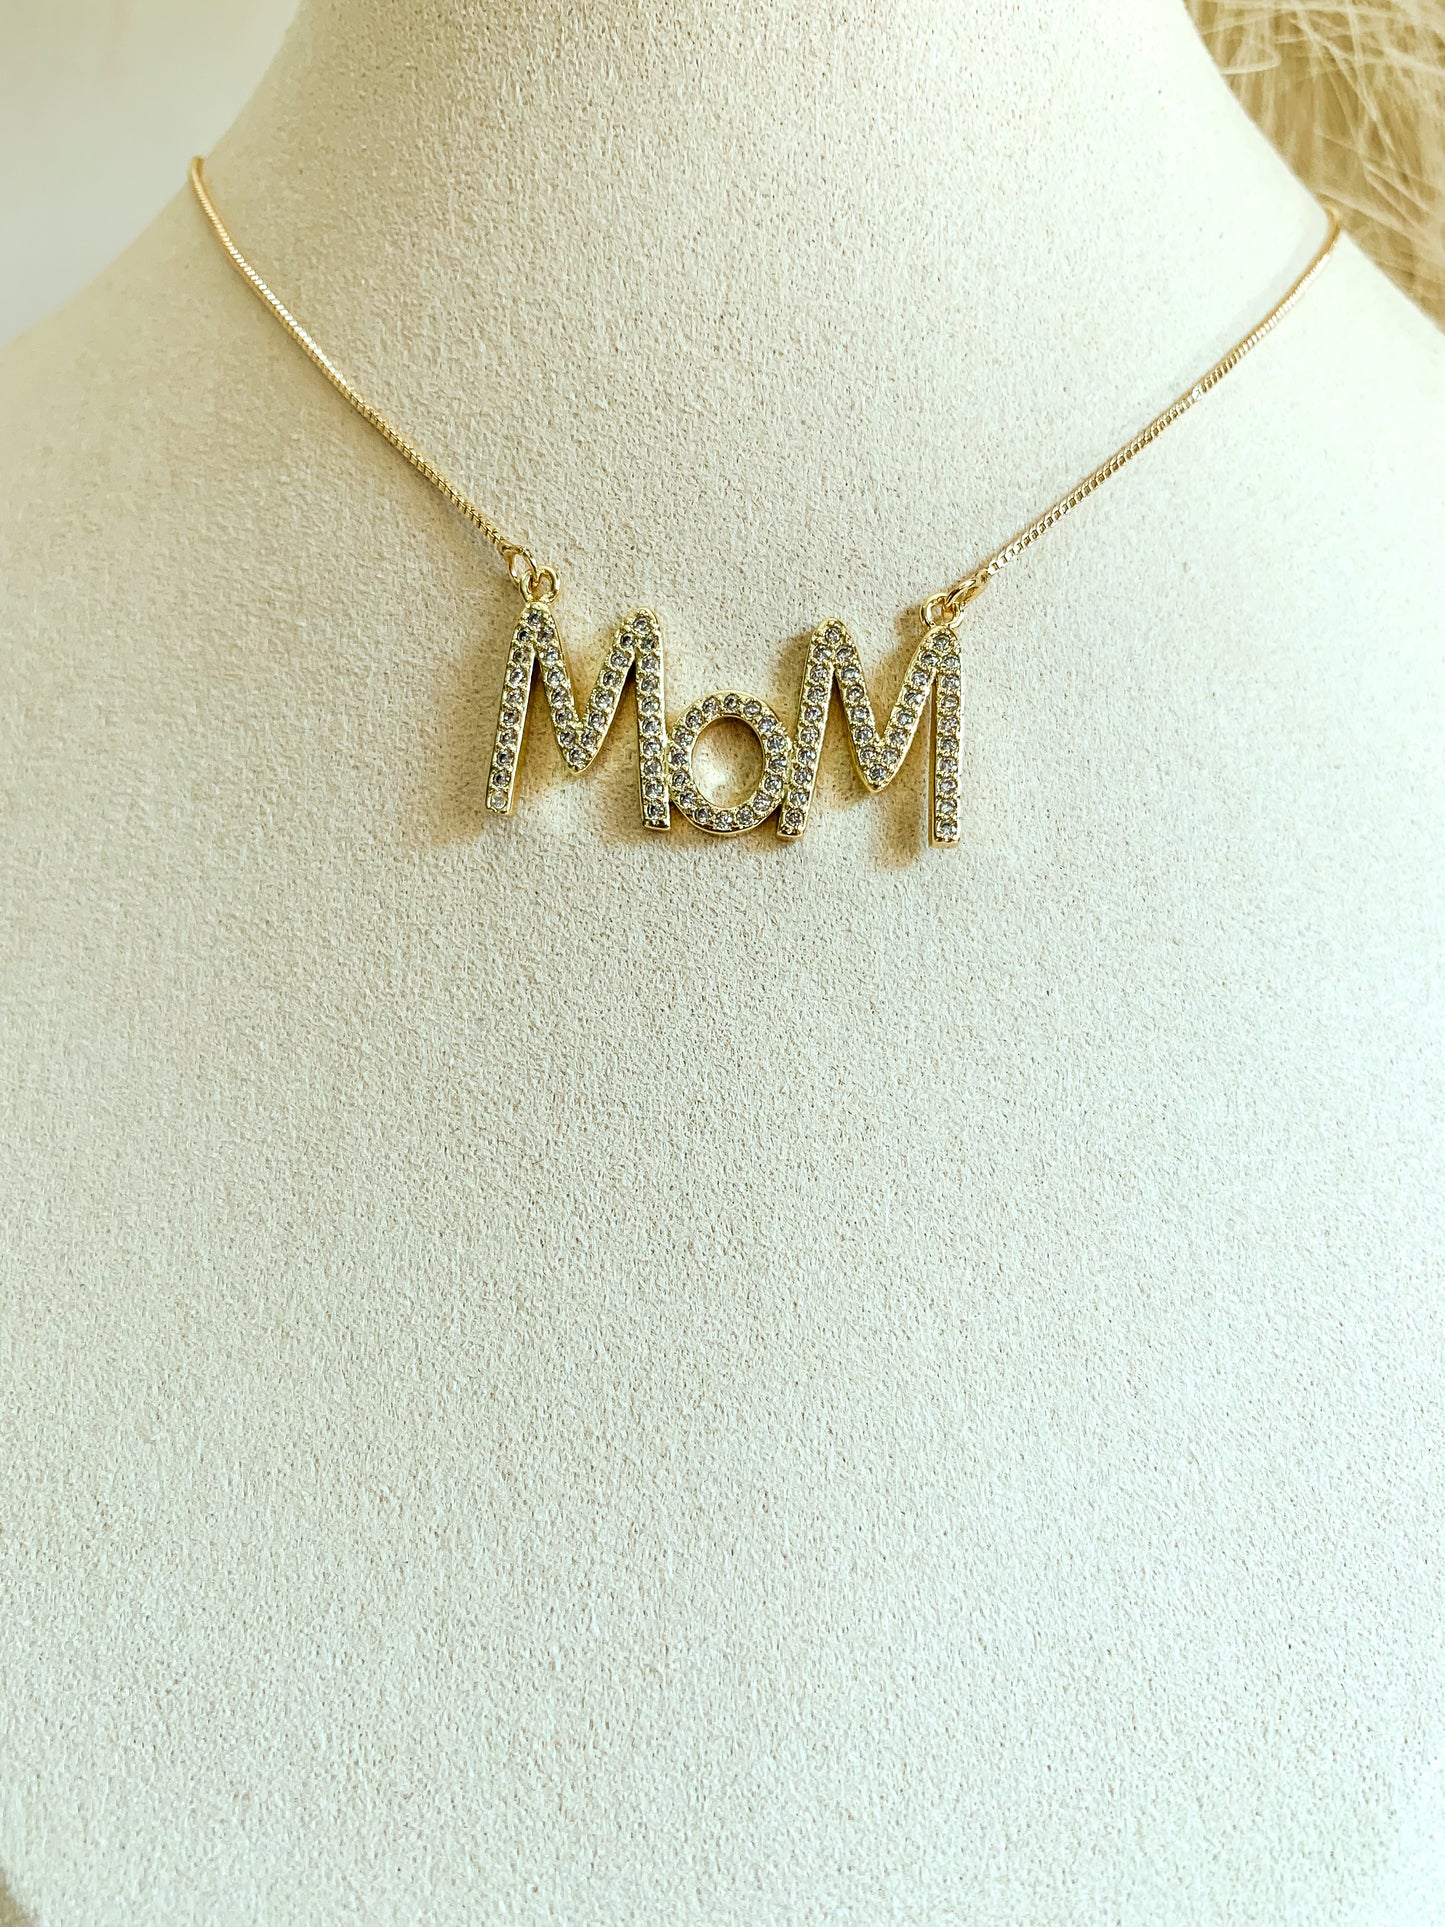 Gold mother necklace